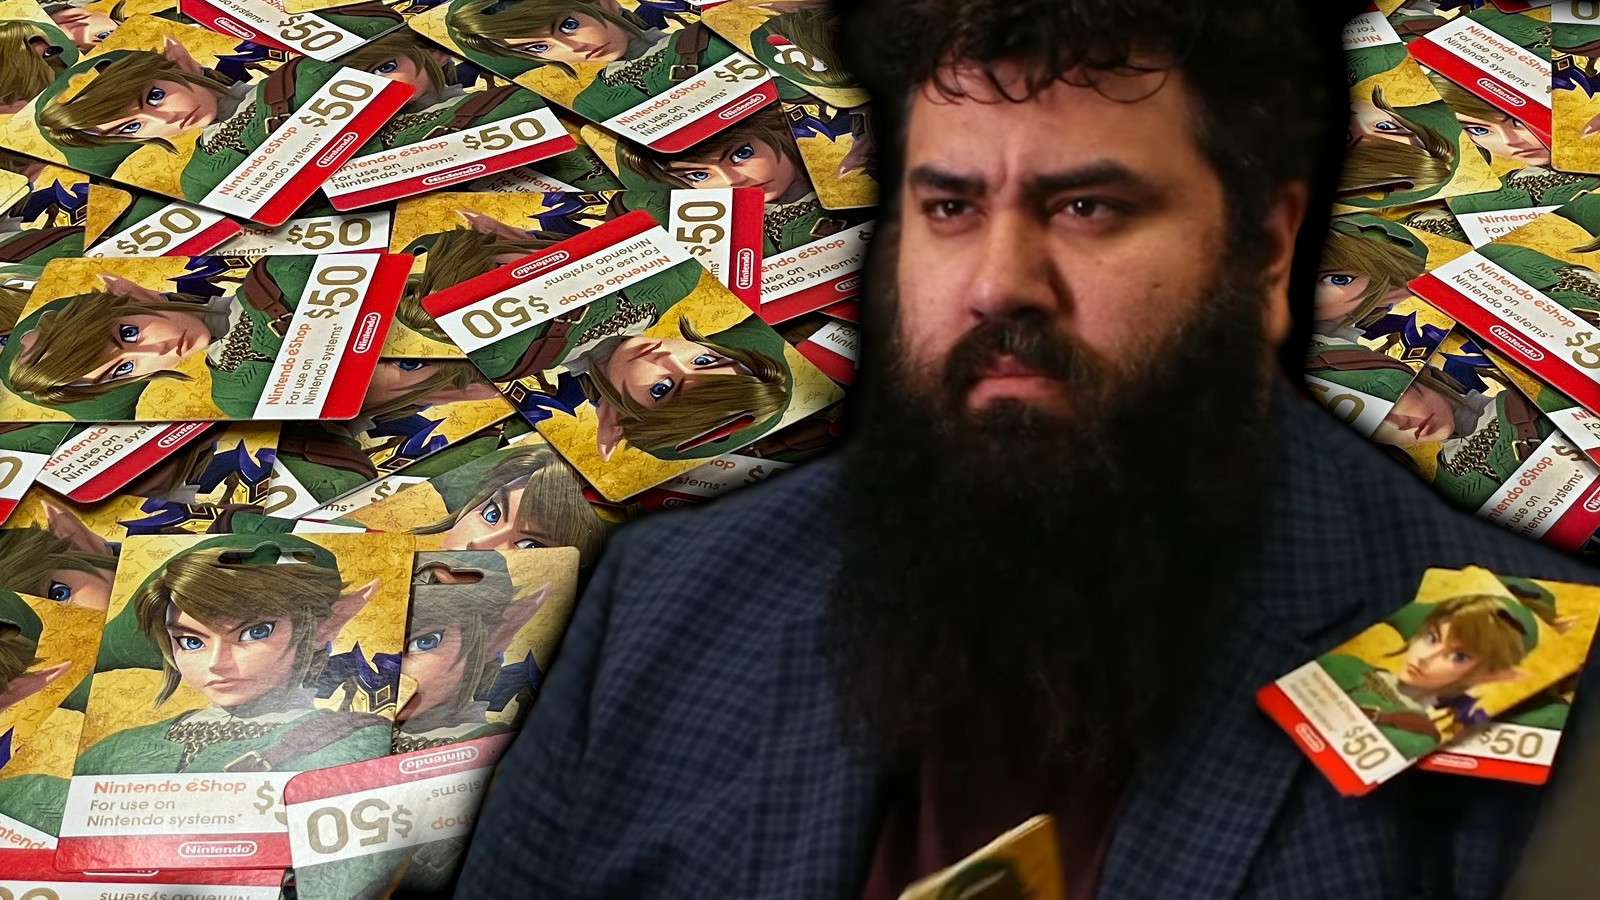 The Completionist buys every eshop game